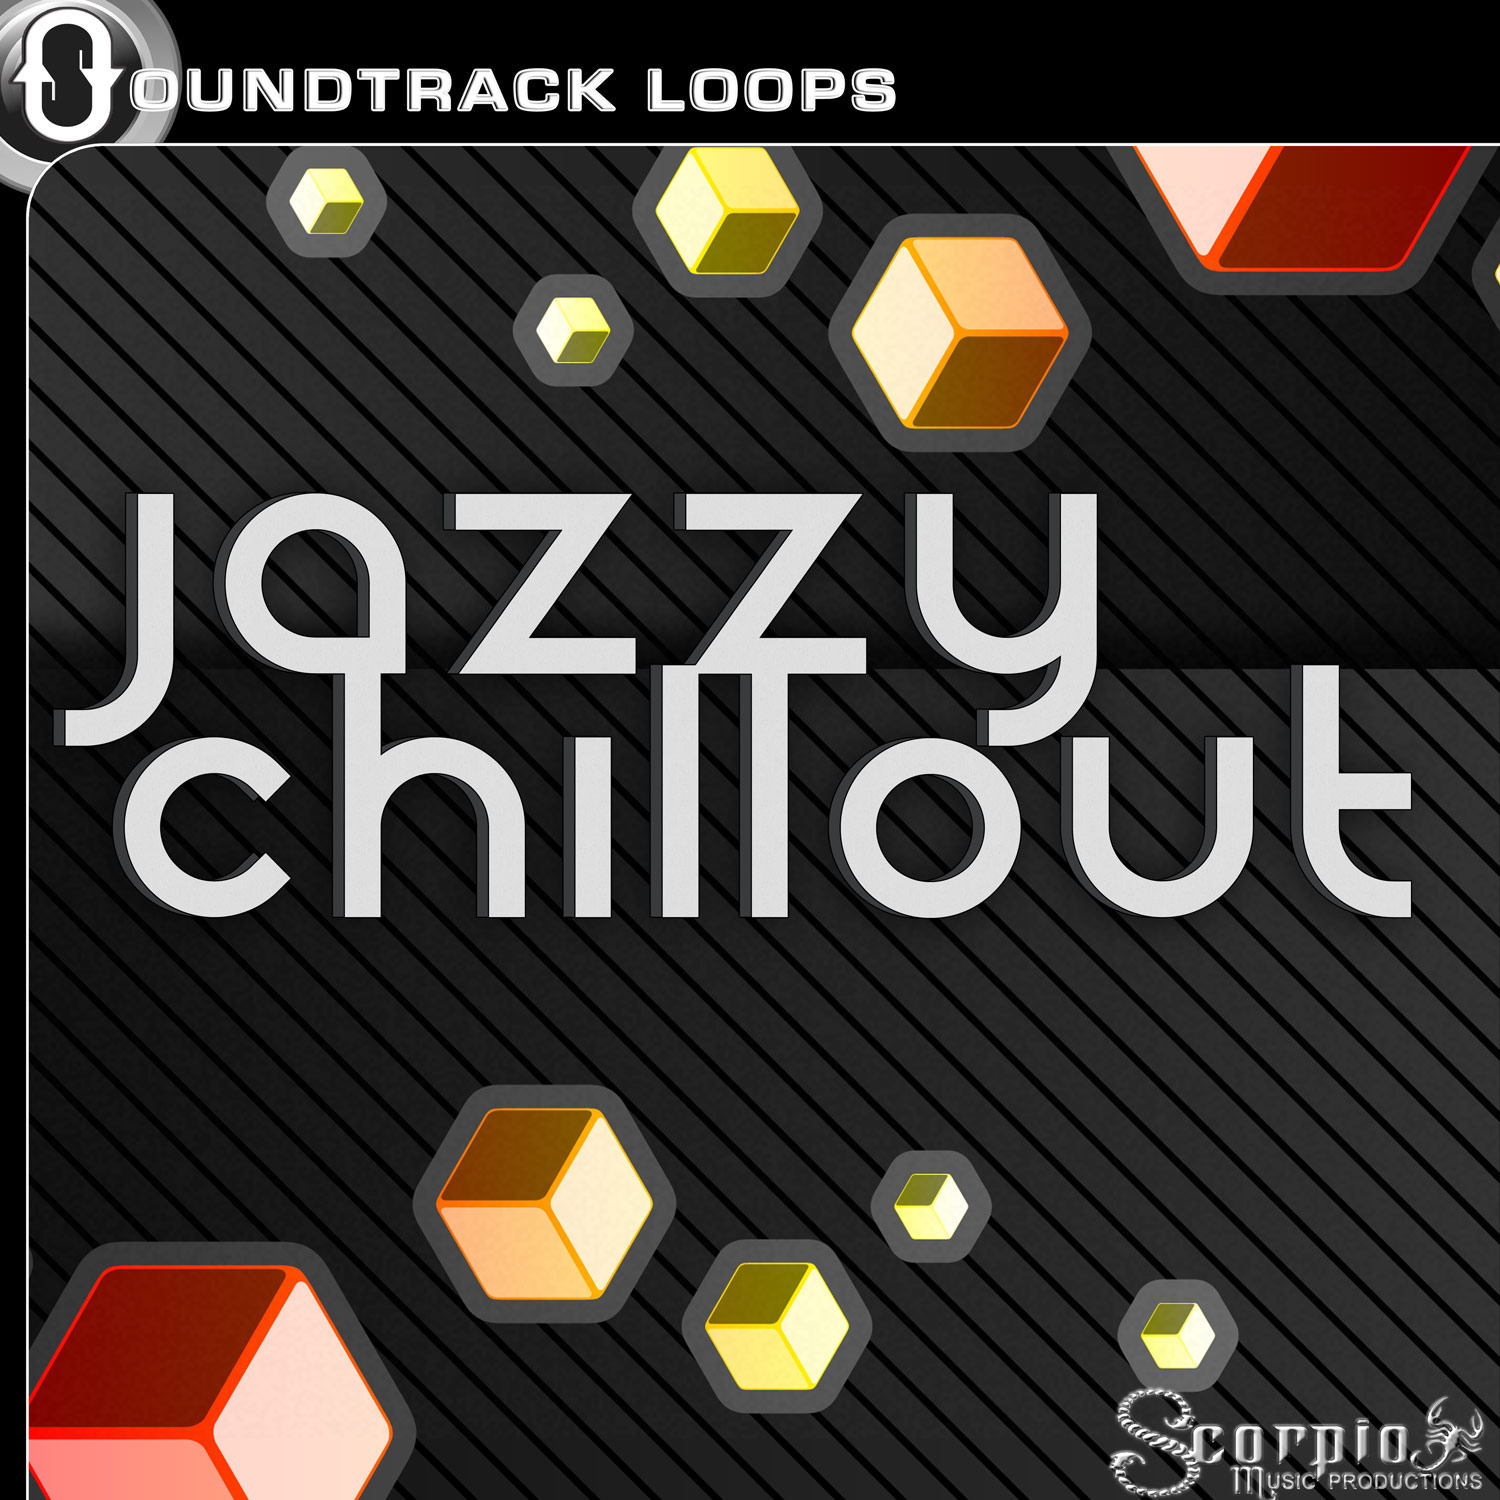 Сэмплы значок. Chillout Sample Pack. Loops. Producer loops - Chillout progressions. 7 chill